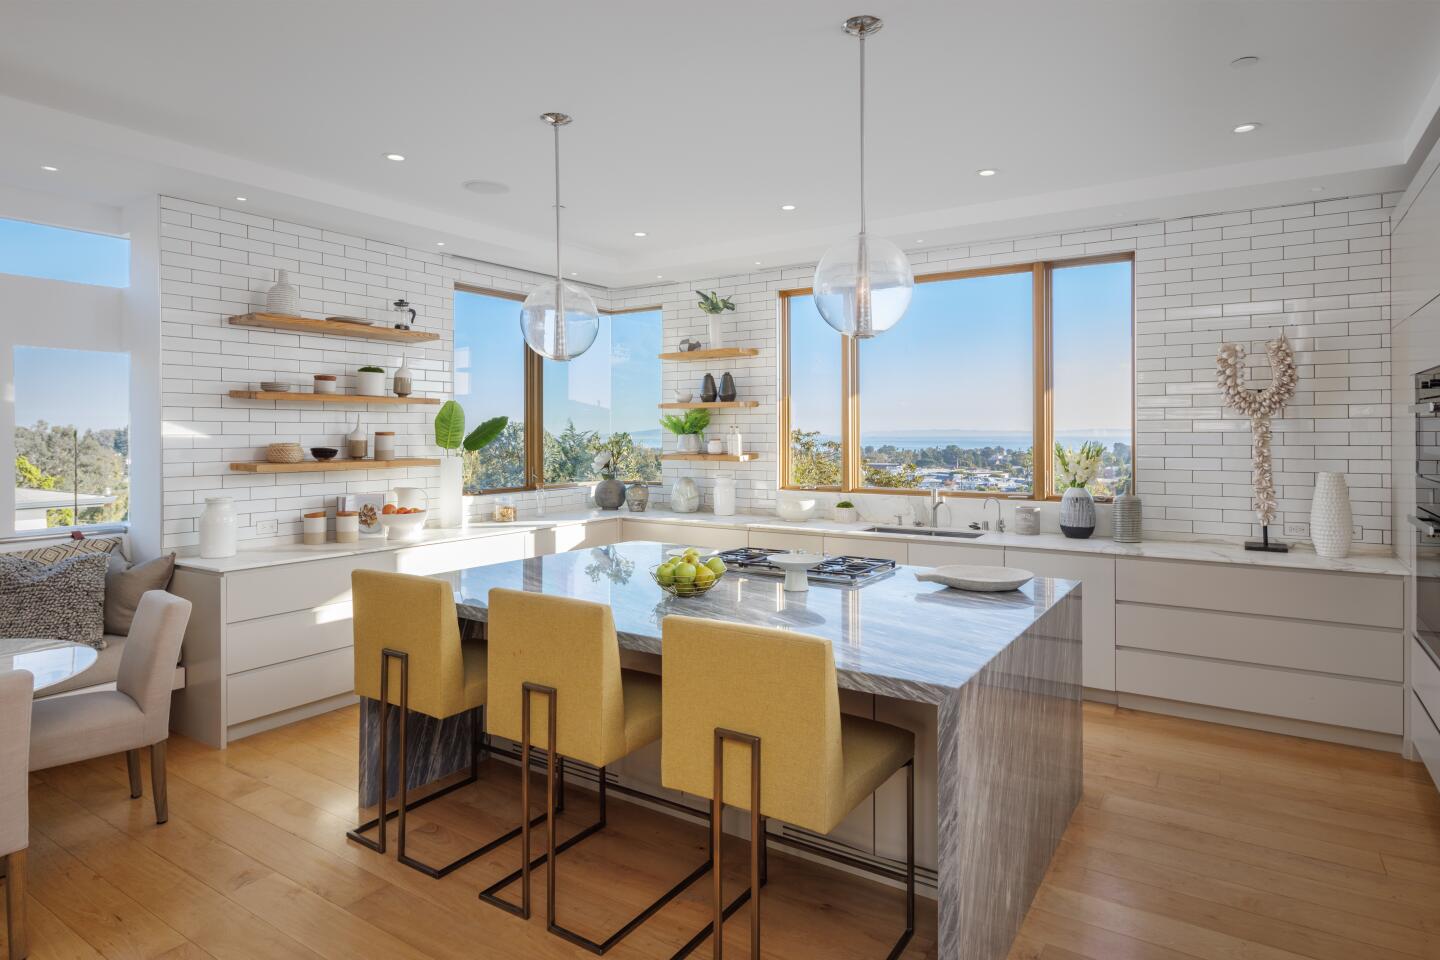 The kitchen has an island with seating and windows with views.